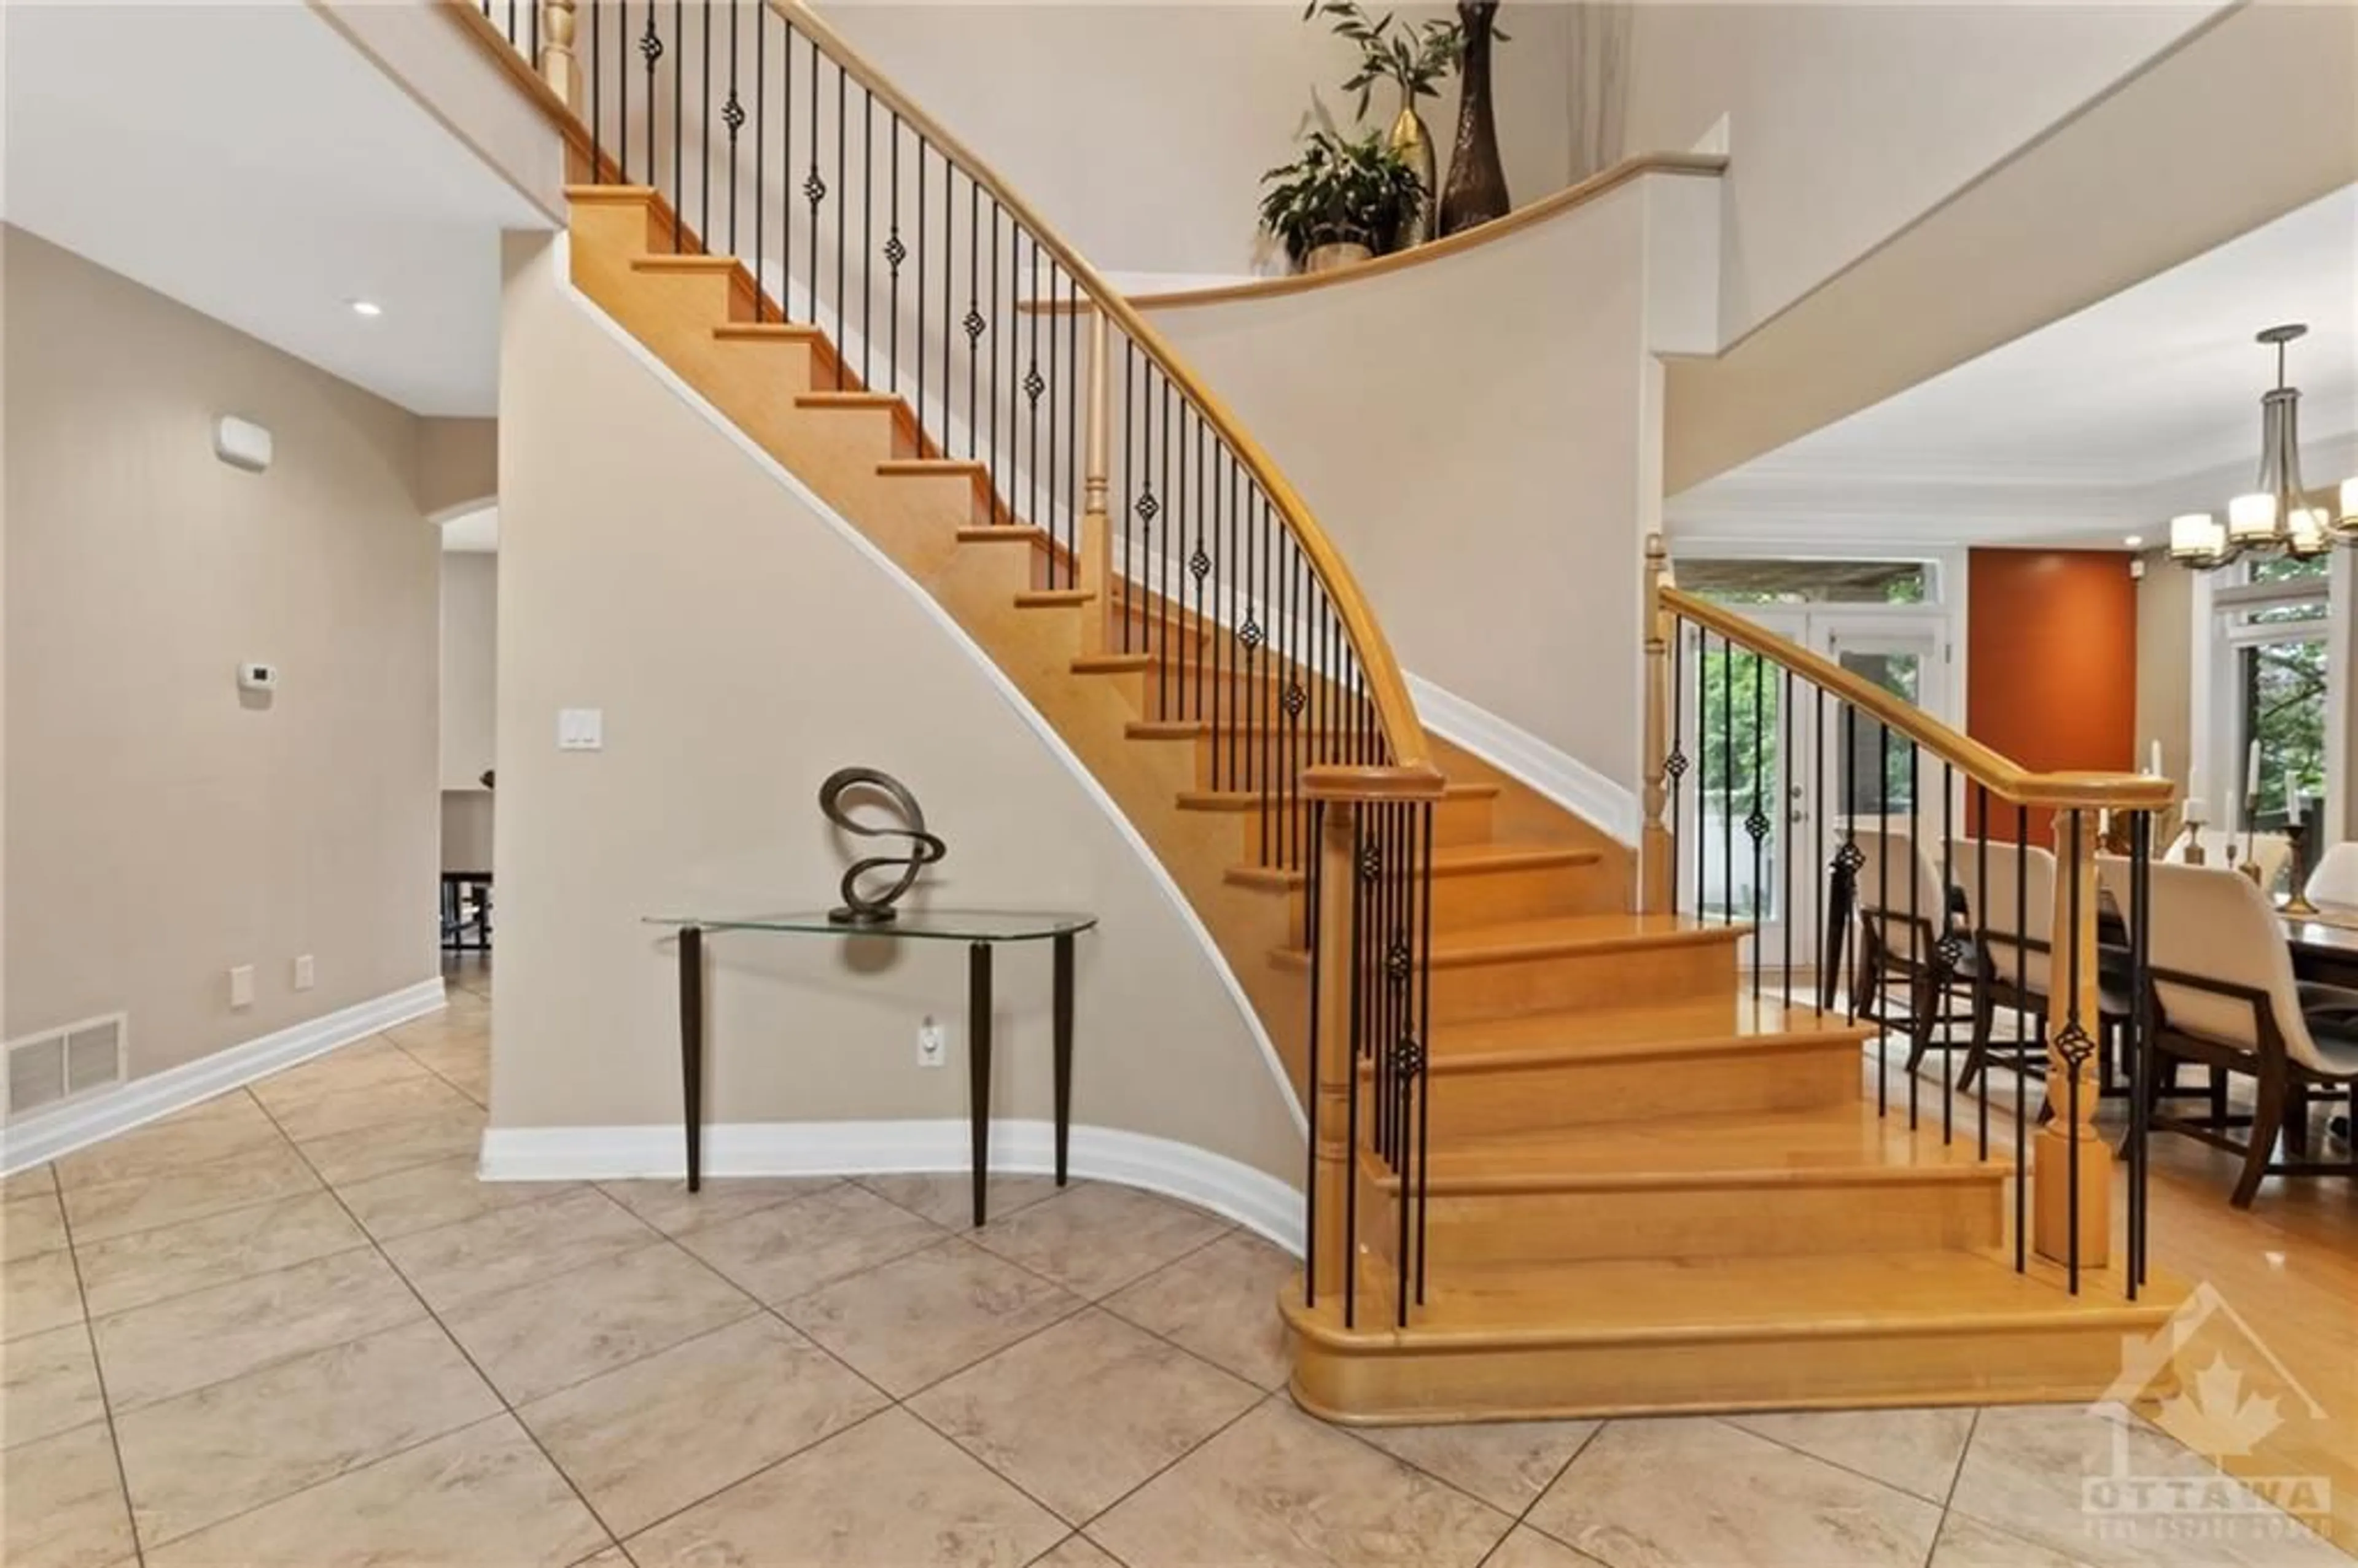 Stairs for 120 ROSSLAND Ave, Ottawa Ontario K2G 2L3